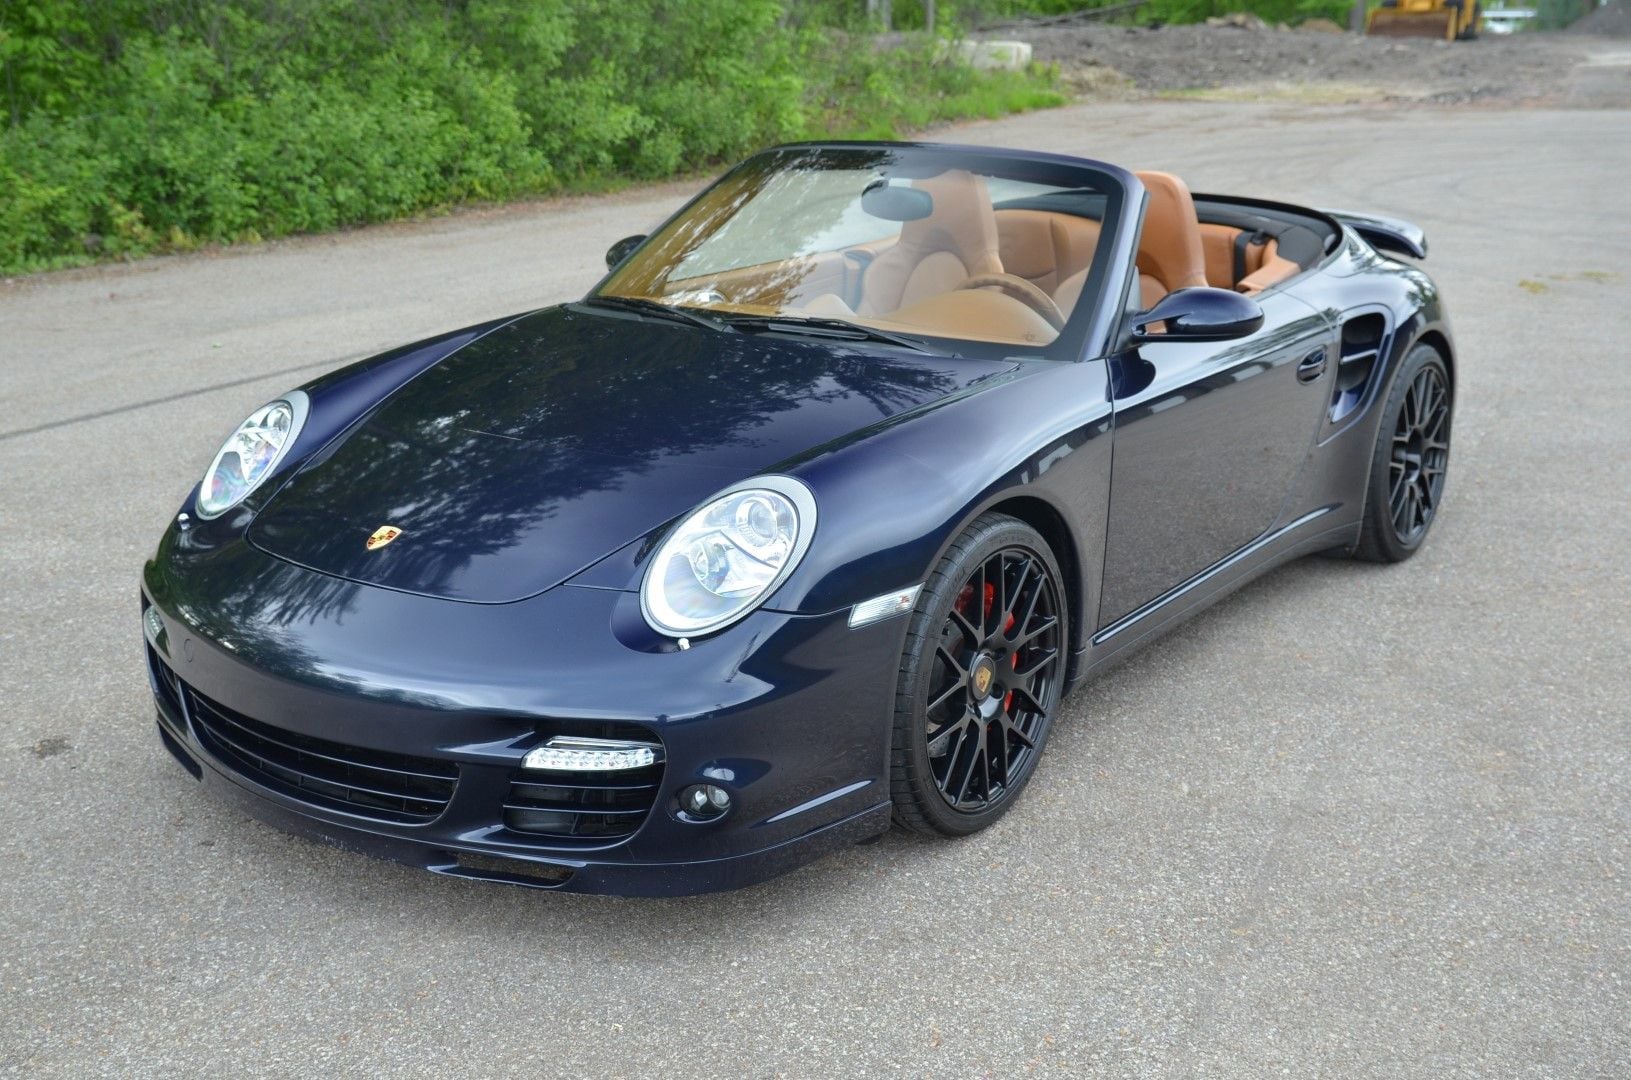 2008 Porsche 911 - 2008 Porsche Turbo Cab Cobalt Blue Tiptronic - Used - VIN WP0CD29968S789219 - 33,500 Miles - 6 cyl - AWD - Automatic - Convertible - Blue - Twinsburg, OH 44087, United States